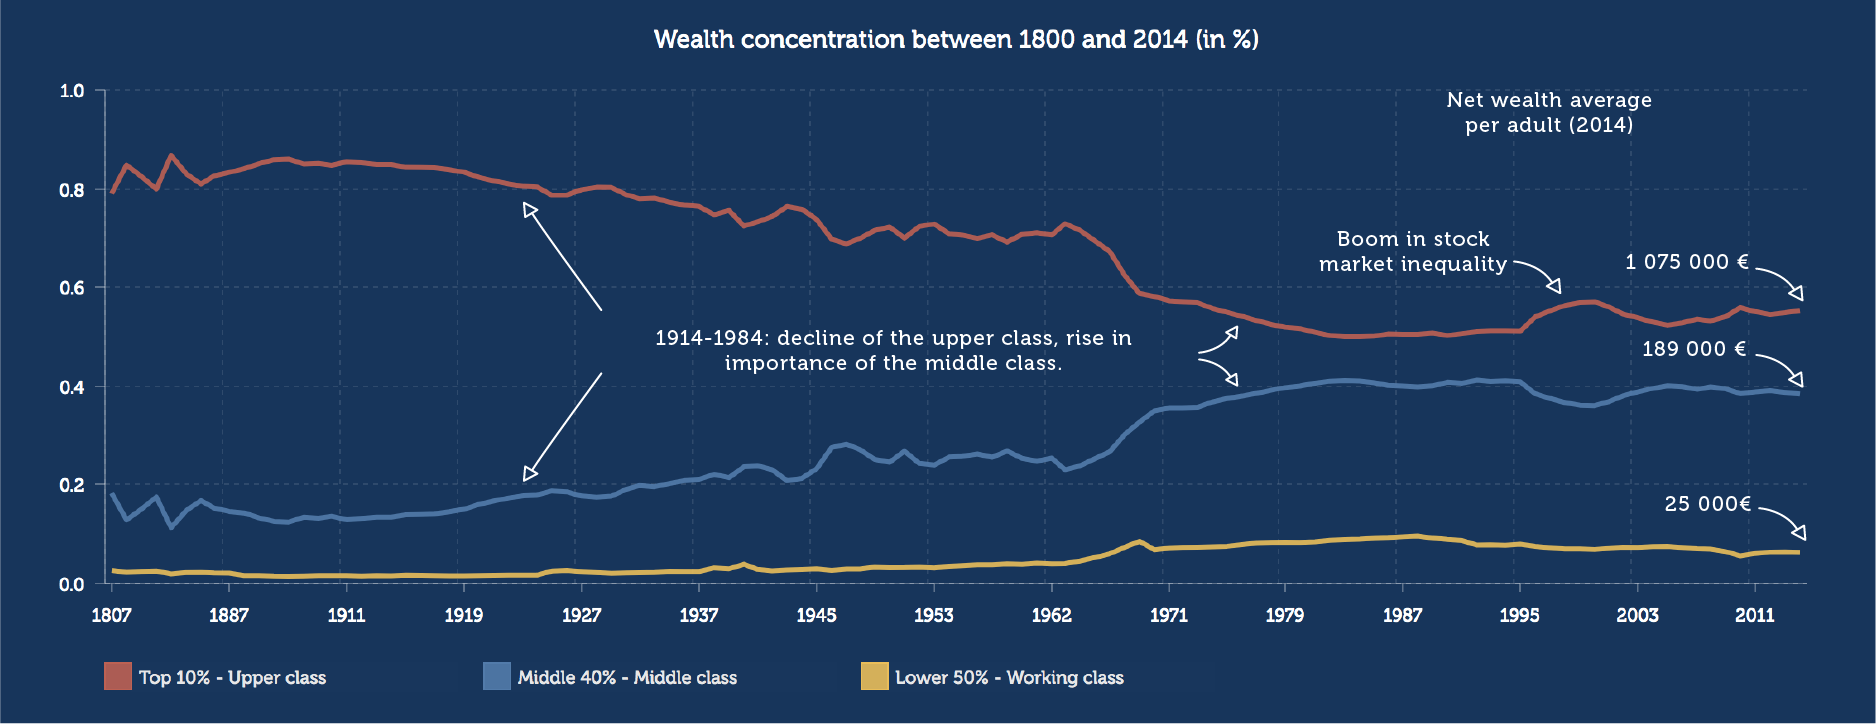 Wealth concentration